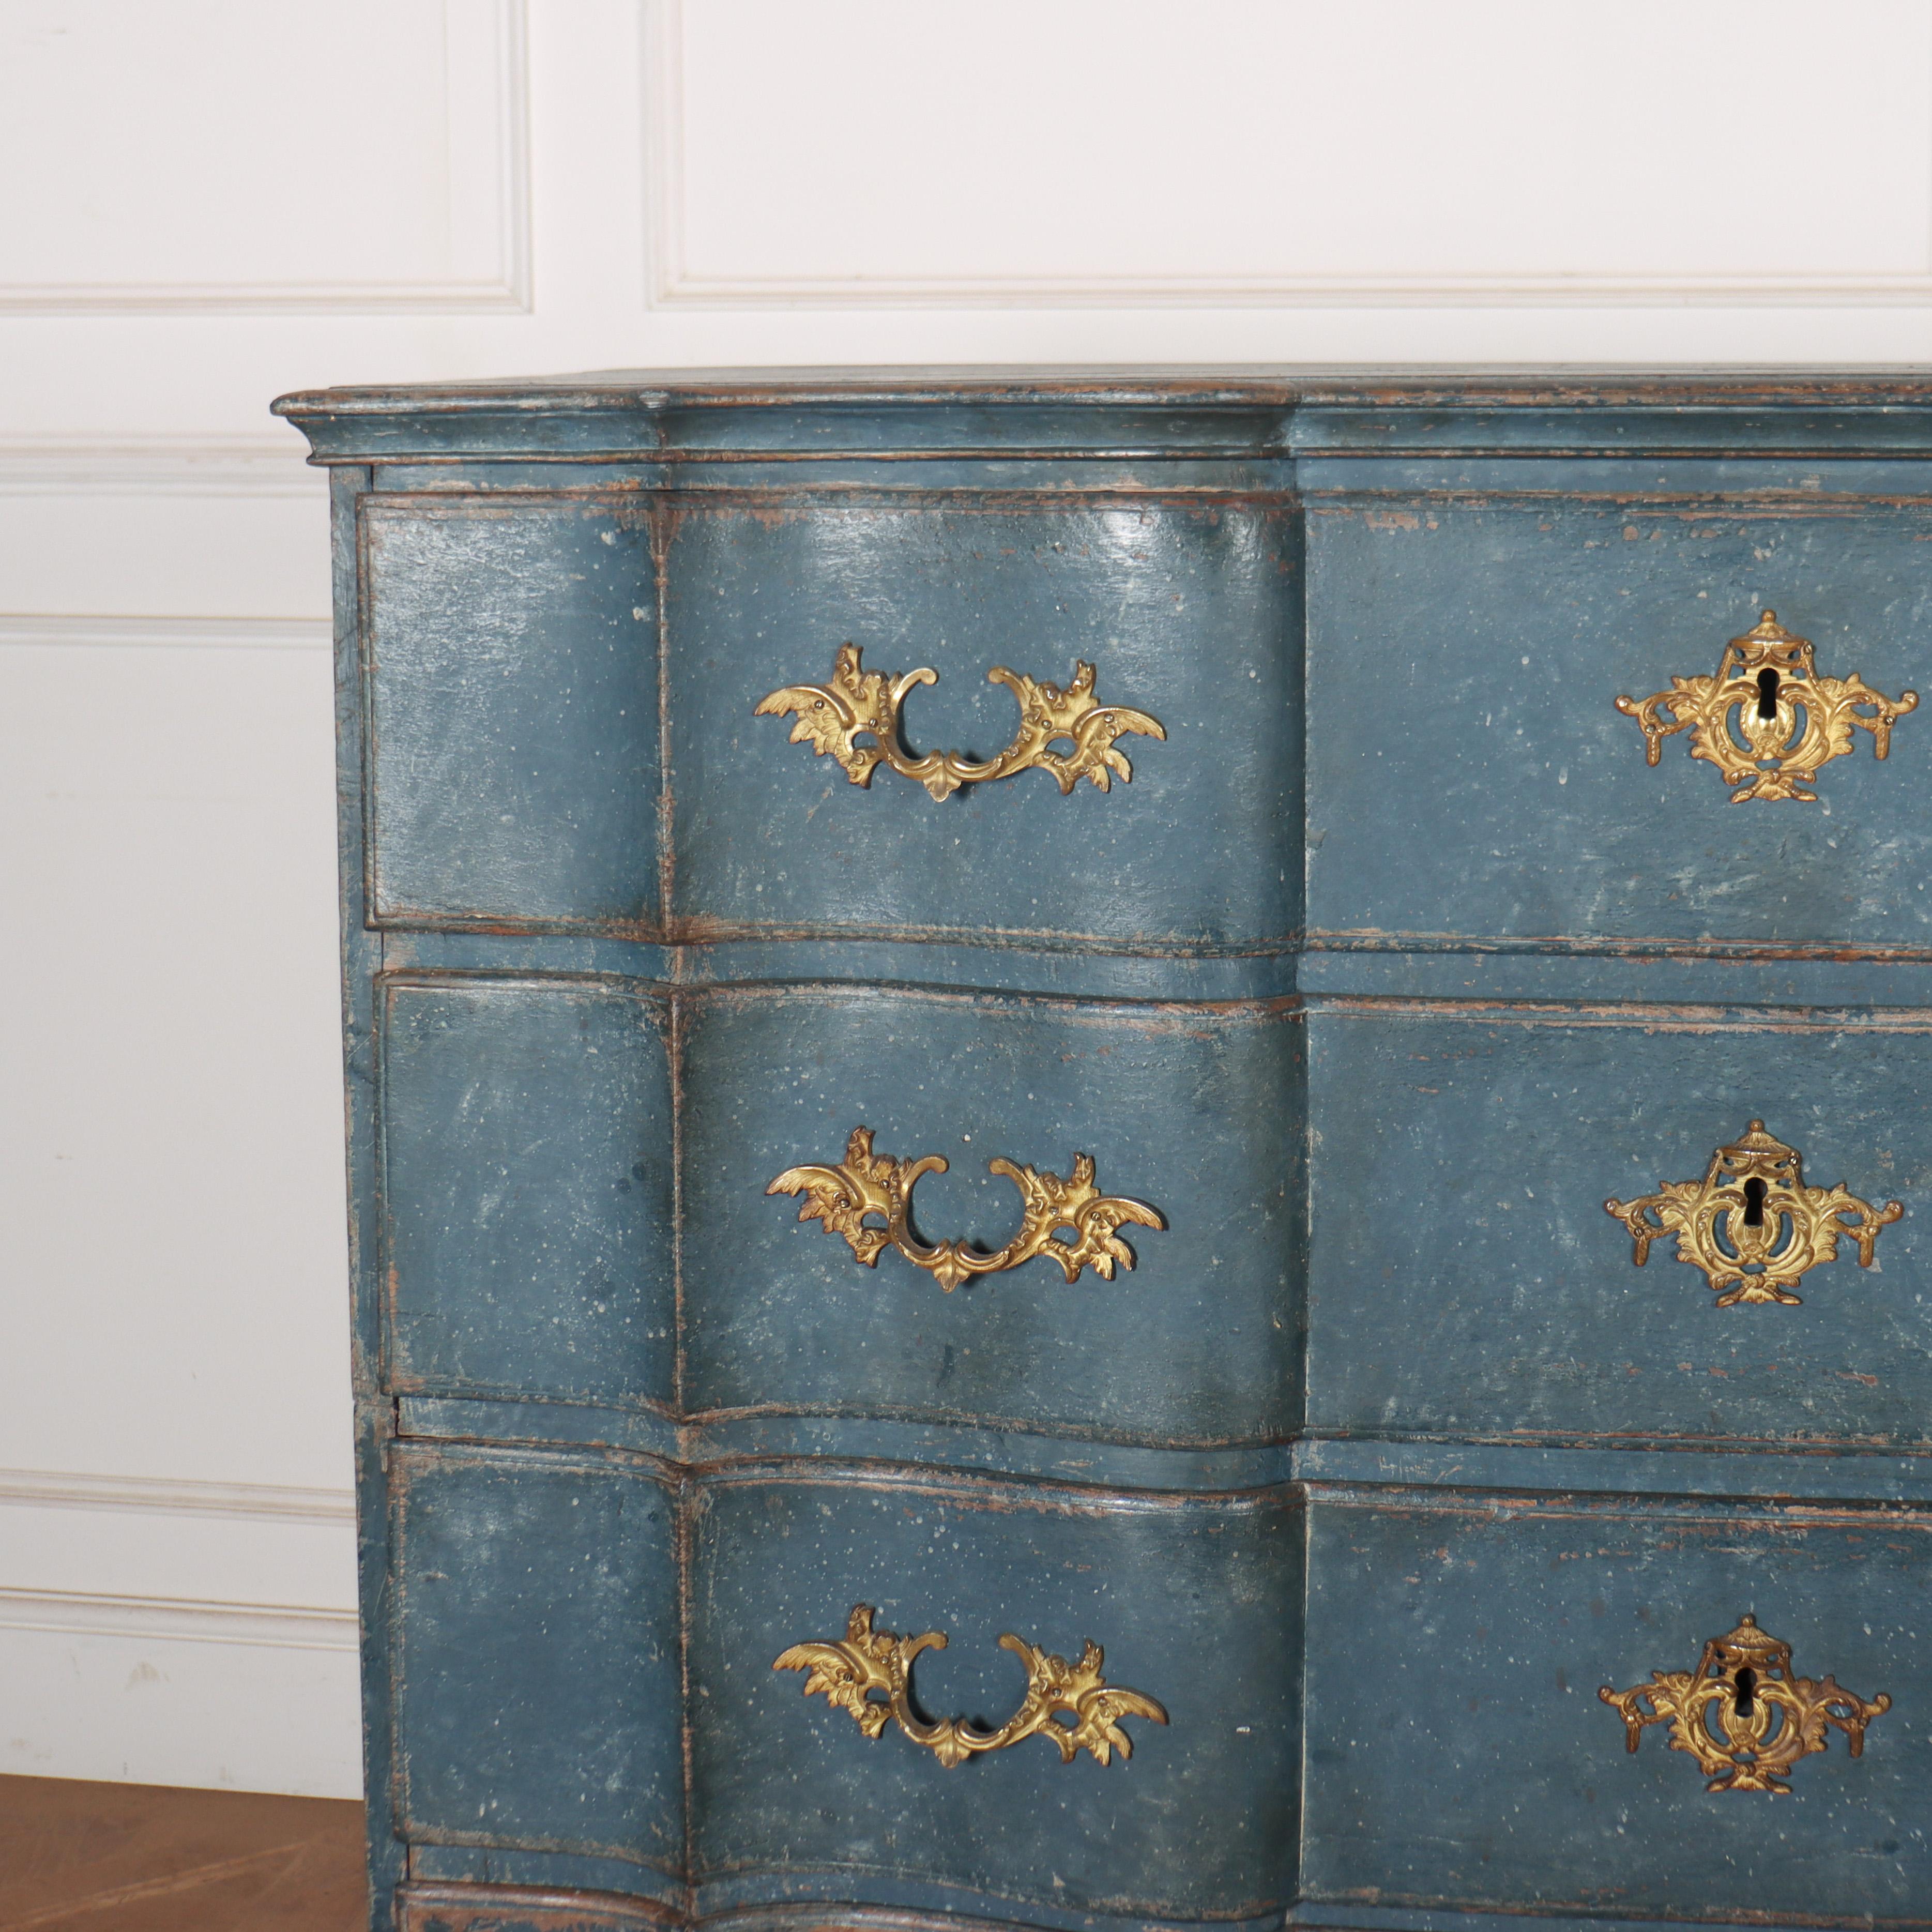 Wonderful 18th C Danish 2 part painted oak serpentine chest of drawers. Great scale. 1760.

Reference: 8199

Dimensions
54.5 inches (138 cms) Wide
24.5 inches (62 cms) Deep
50.5 inches (128 cms) High